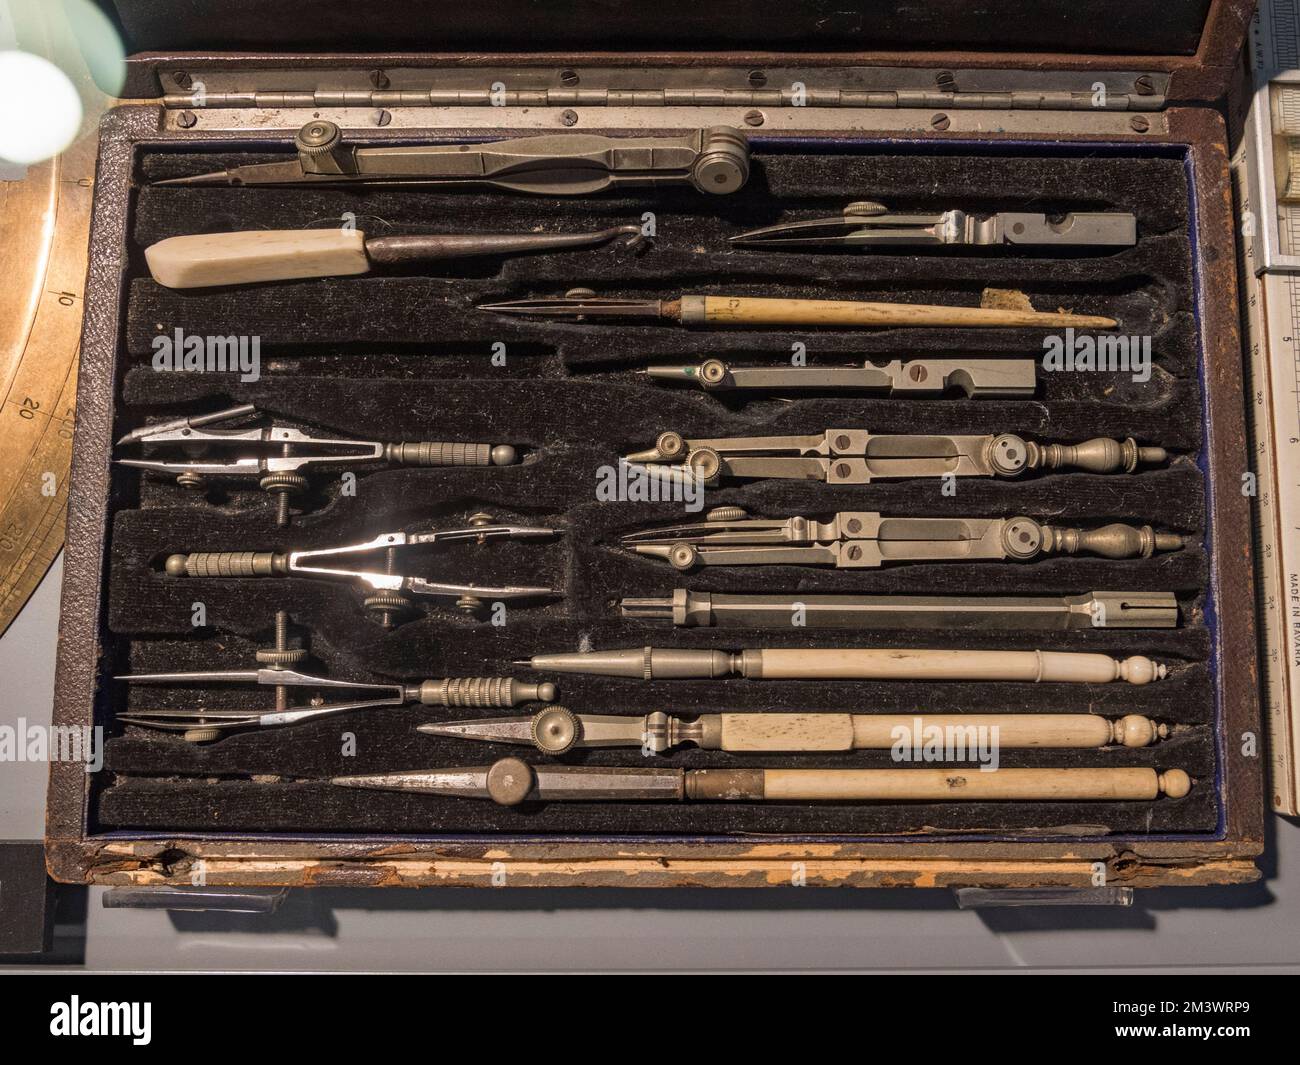 A set of technical drawing tools used by the Vickers designer Sir Sydney Camm (1950s) on display in the Bellman Hanger, Brooklands Museum, Surrey, UK Stock Photo